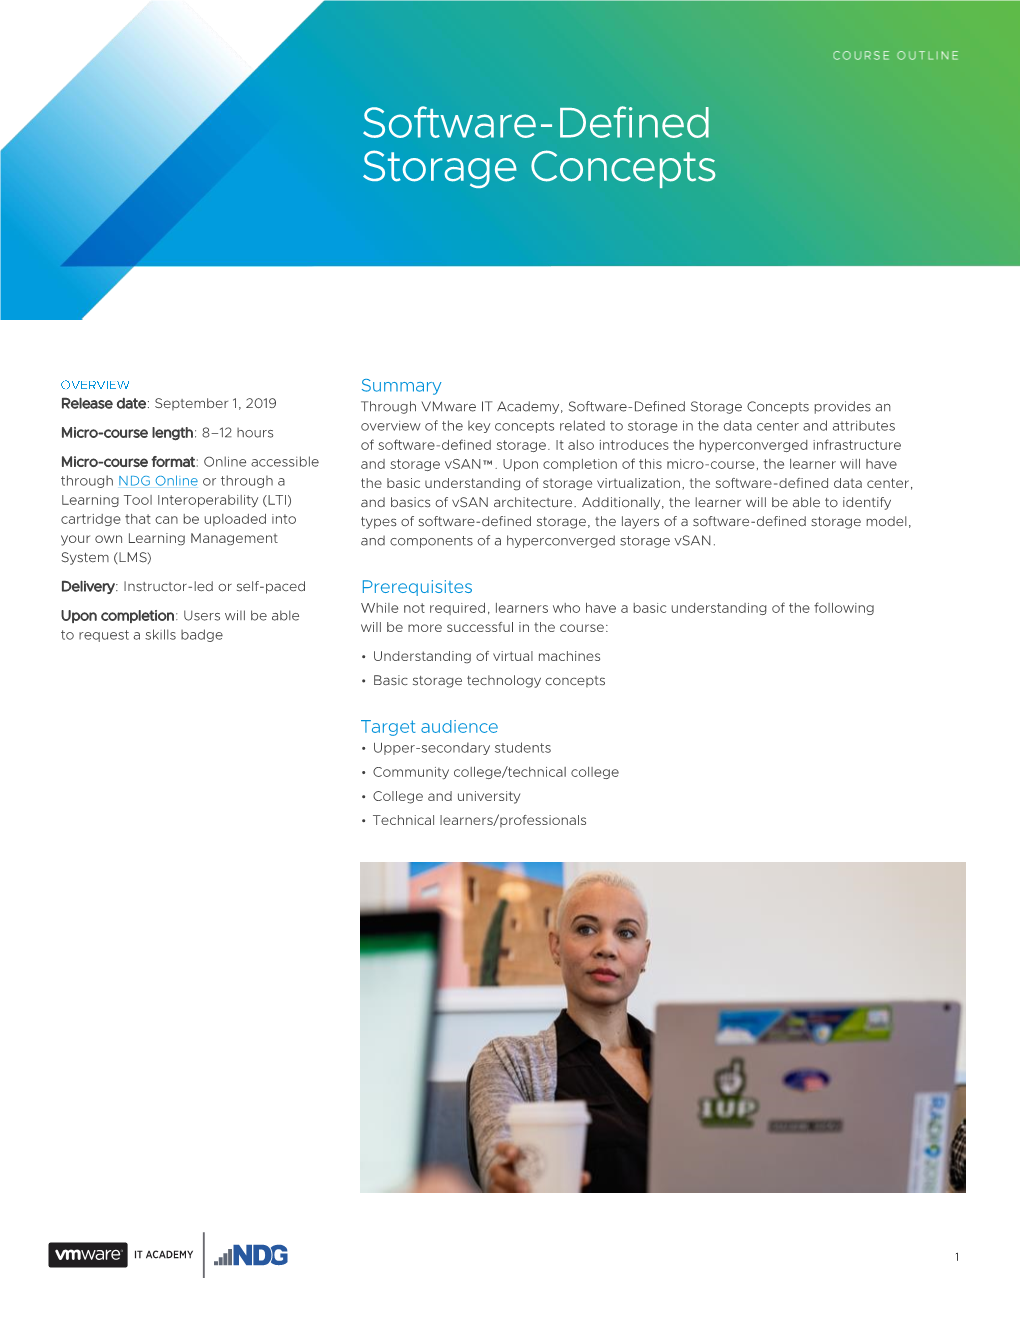 Software-Defined Storage Concepts